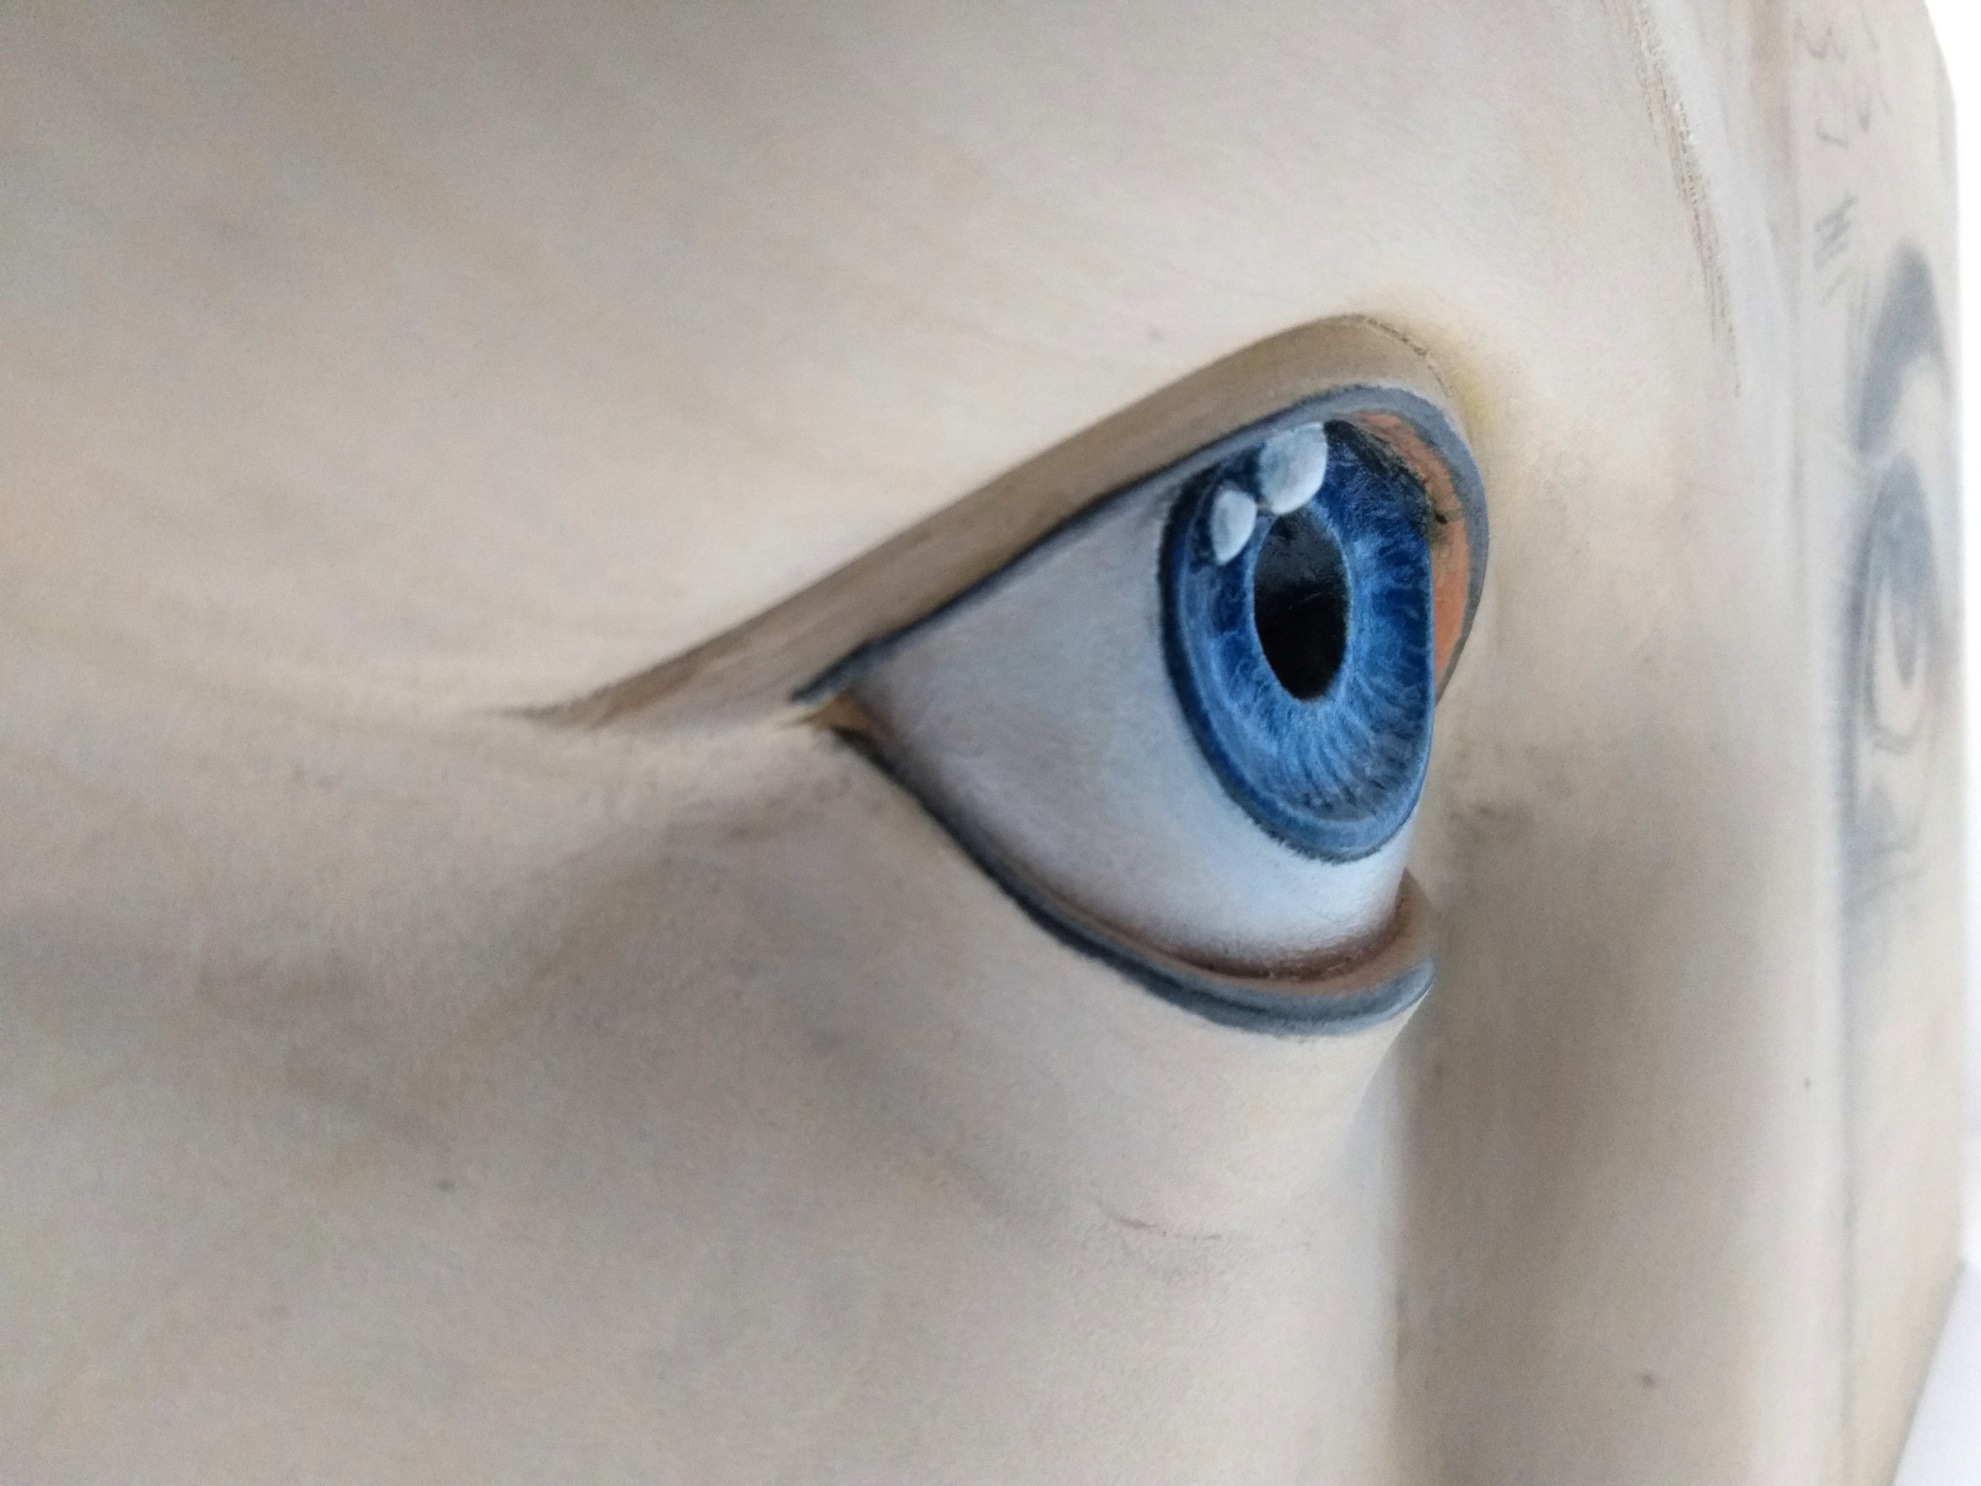 Carving Realistic Eyes in Wood